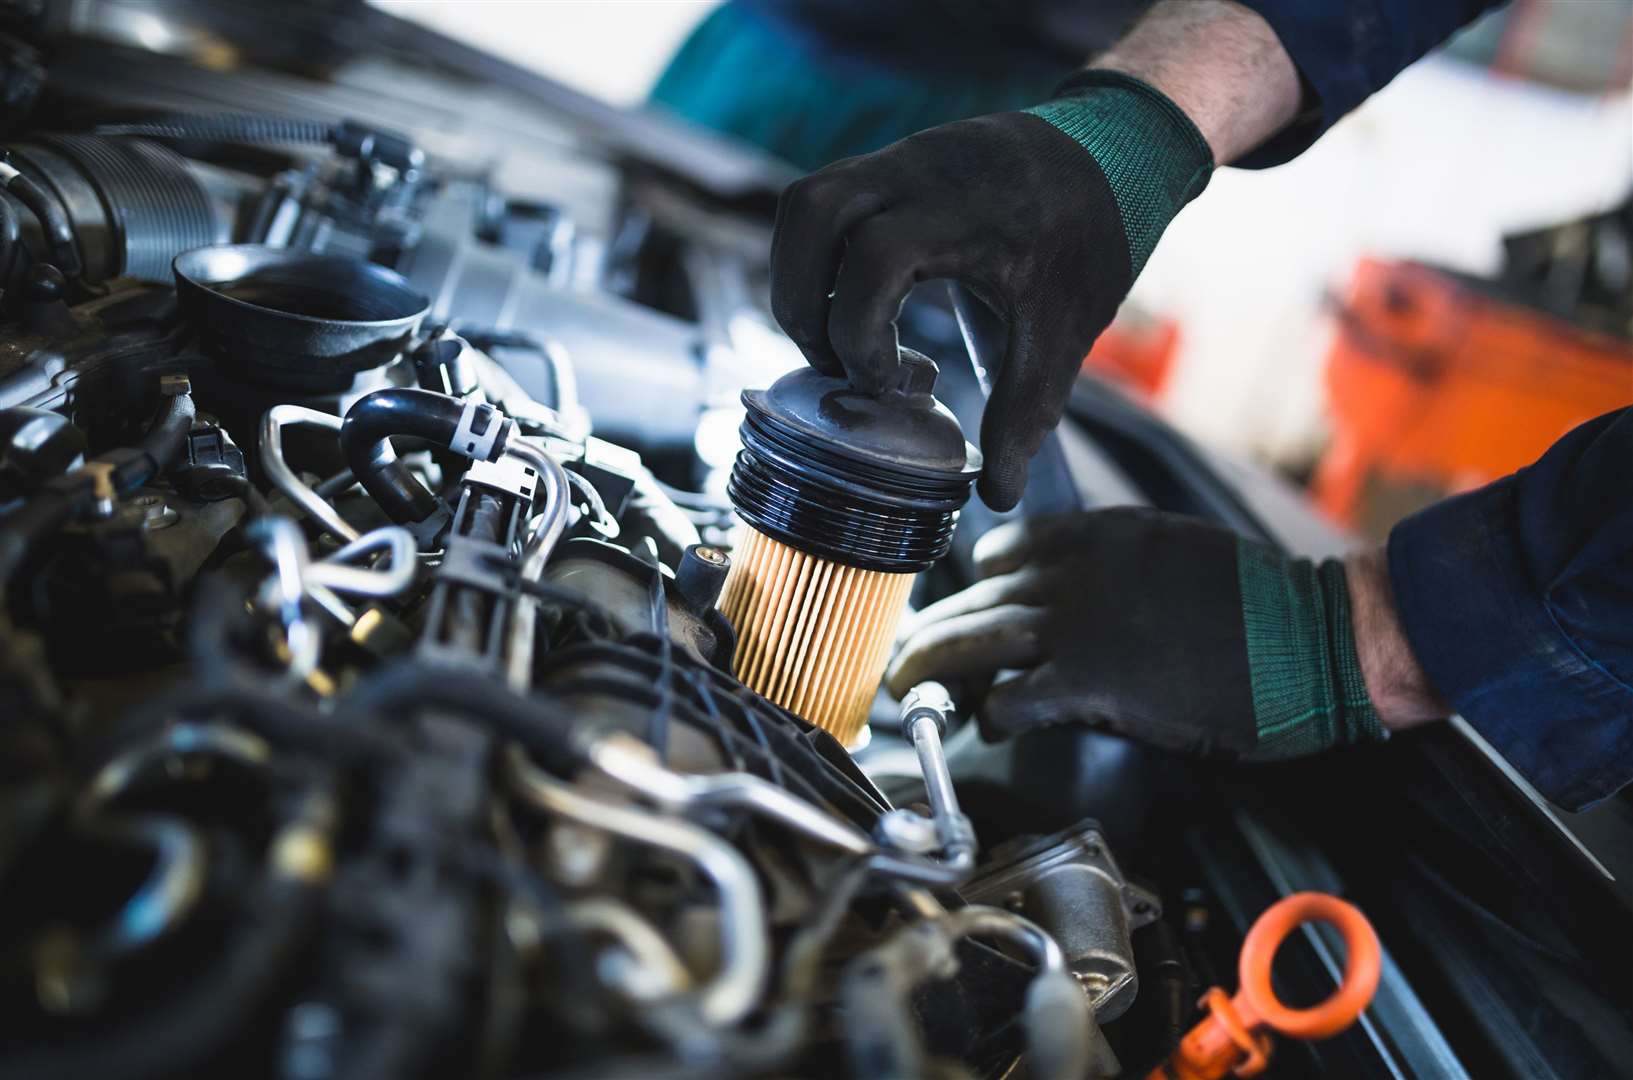 The AA is proposing a Skills Funding Agency to support mechanics as technology changes. Image: iStock.